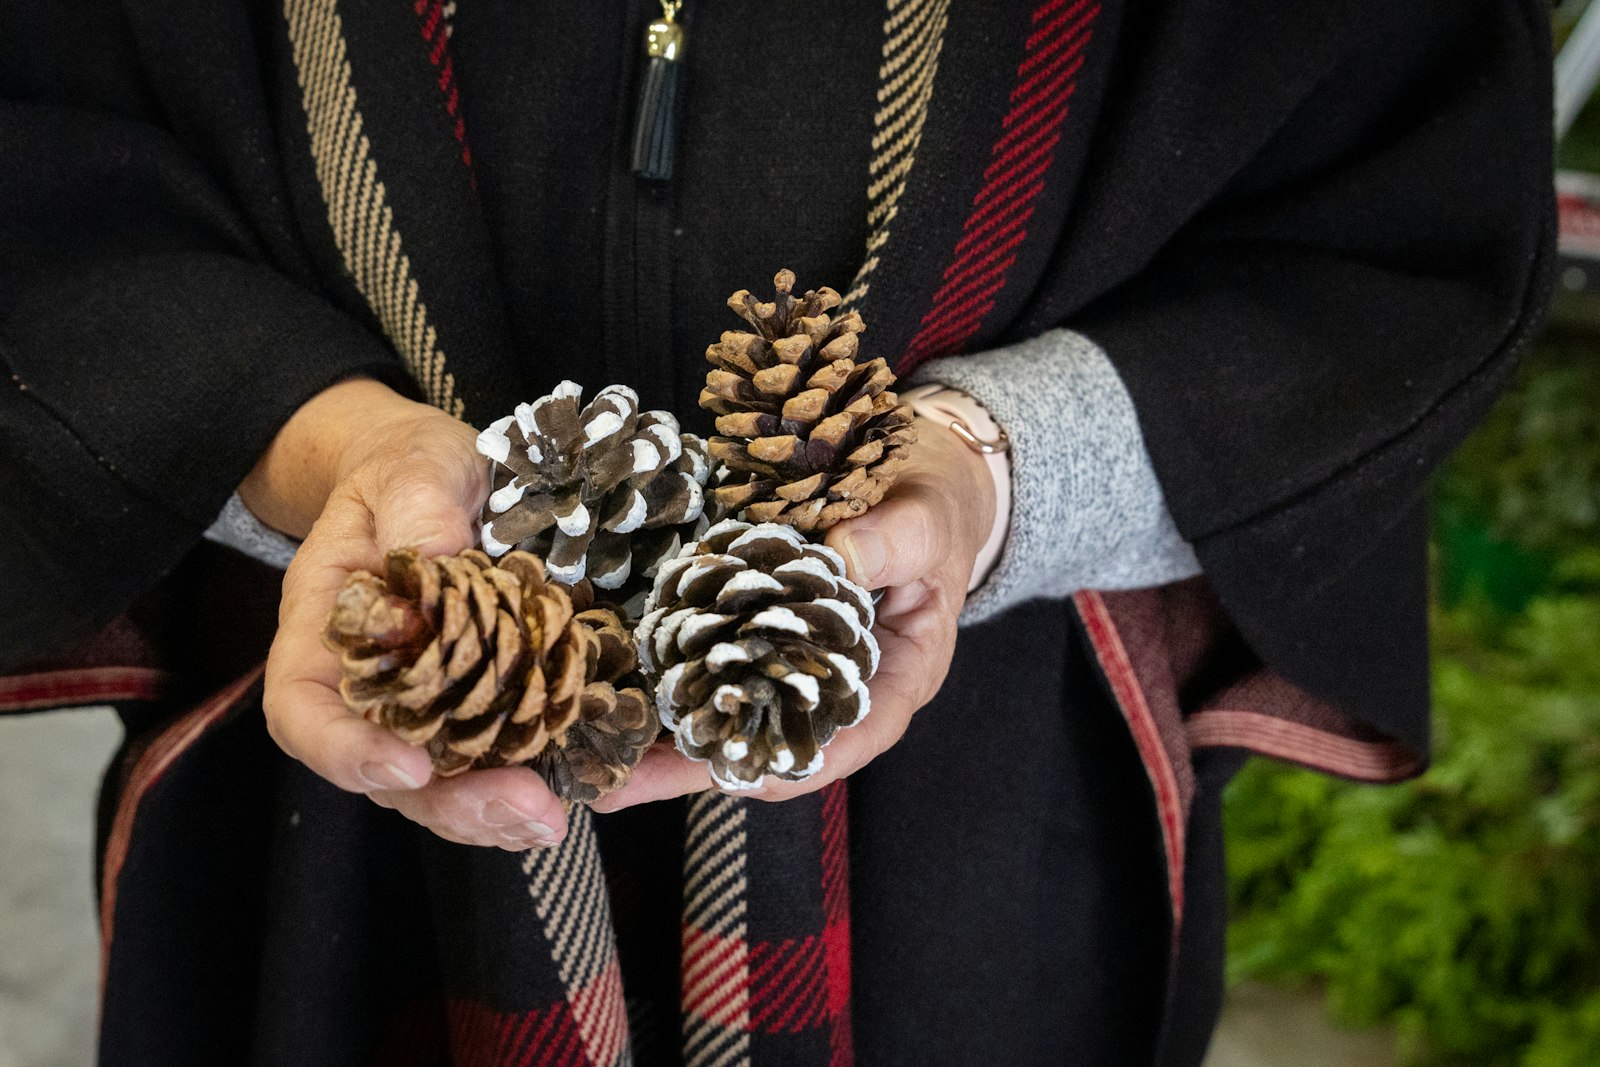 Catherine Genovese holds some of the decorative pinecones the farm sells during the Christmas season. In addition to trees, Candy Cane Christmas Tree Farm also offers customized wreaths and garland, cross-shaped pine decorations and tree stands.